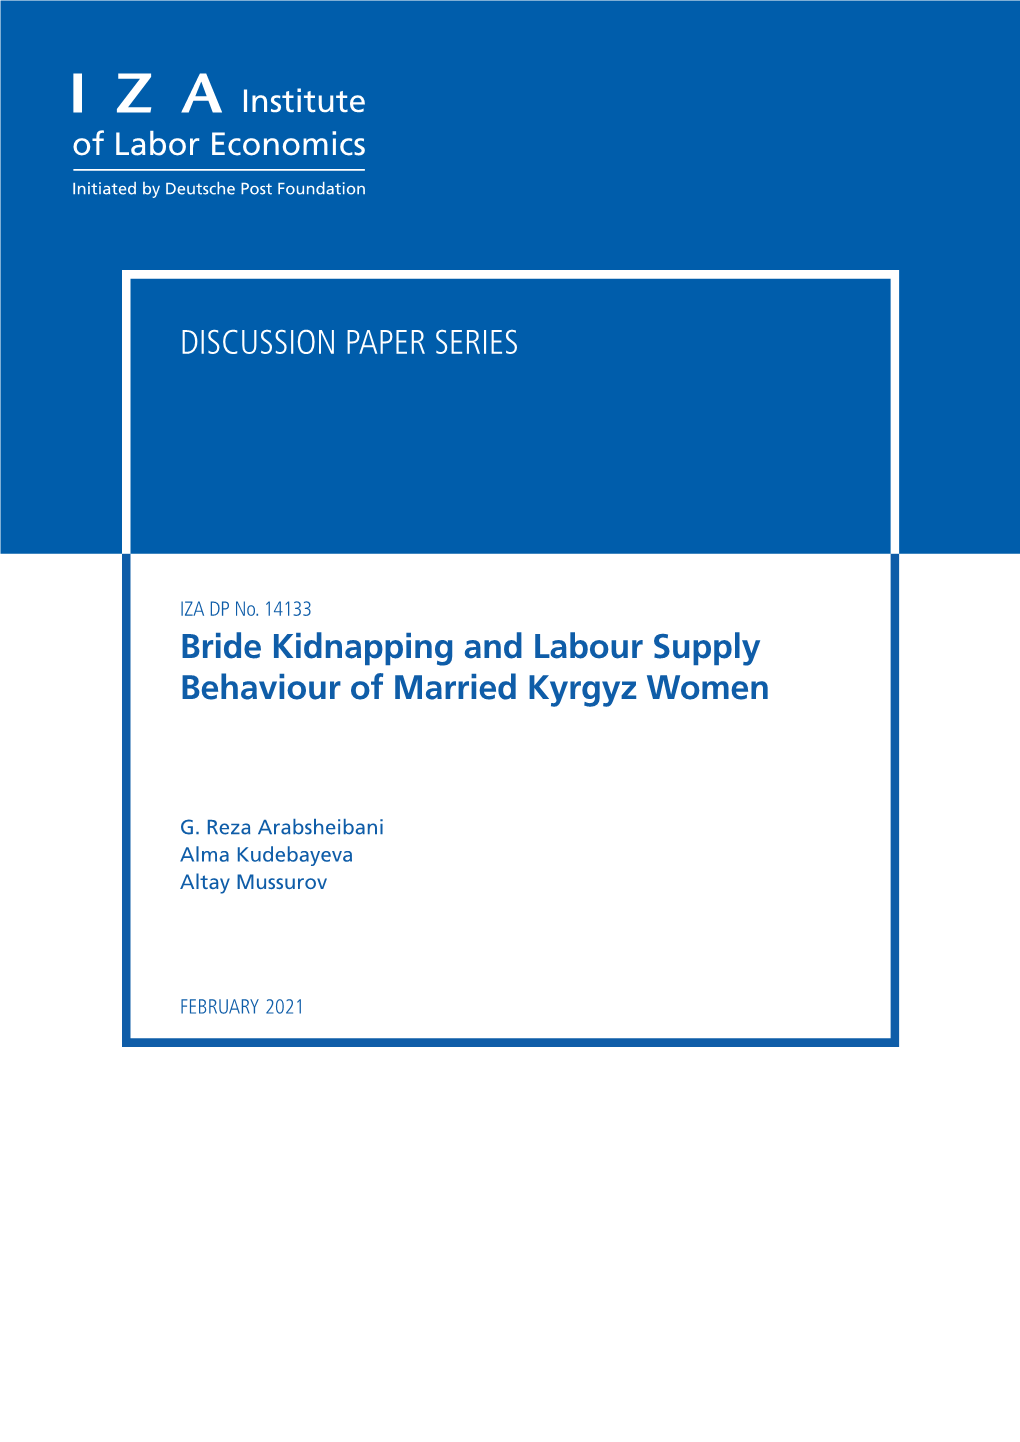 Bride Kidnapping and Labour Supply Behaviour of Married Kyrgyz Women